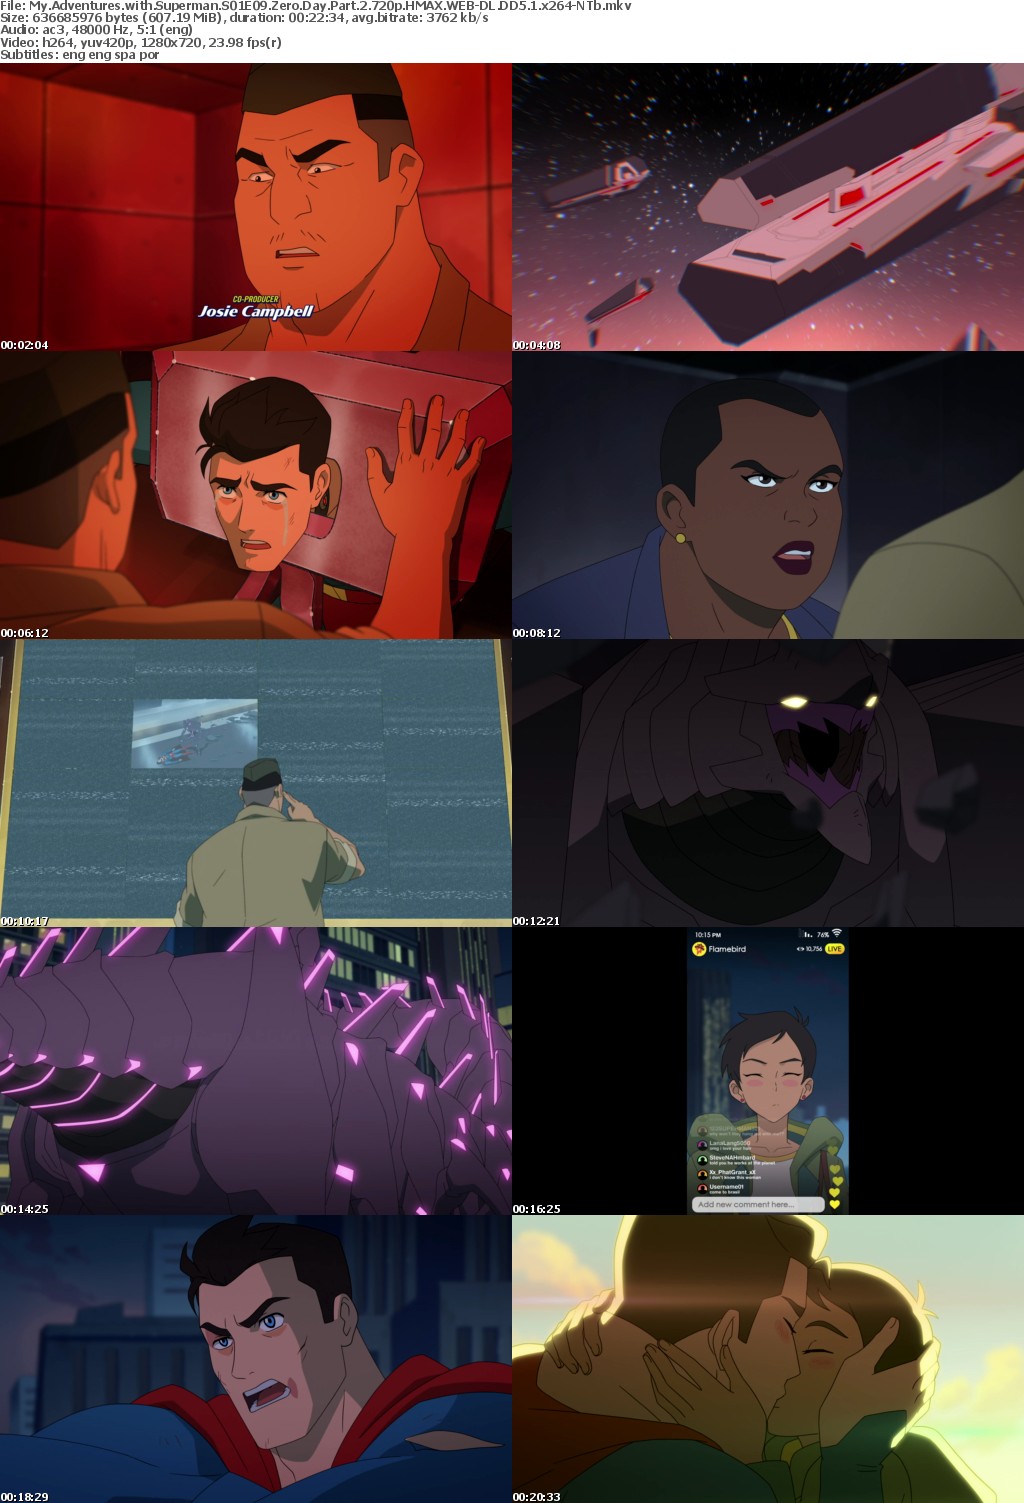 My Adventures with Superman S01E09 Zero Day Part 2 720p HMAX WEB-DL DD5 1 x264-NTb